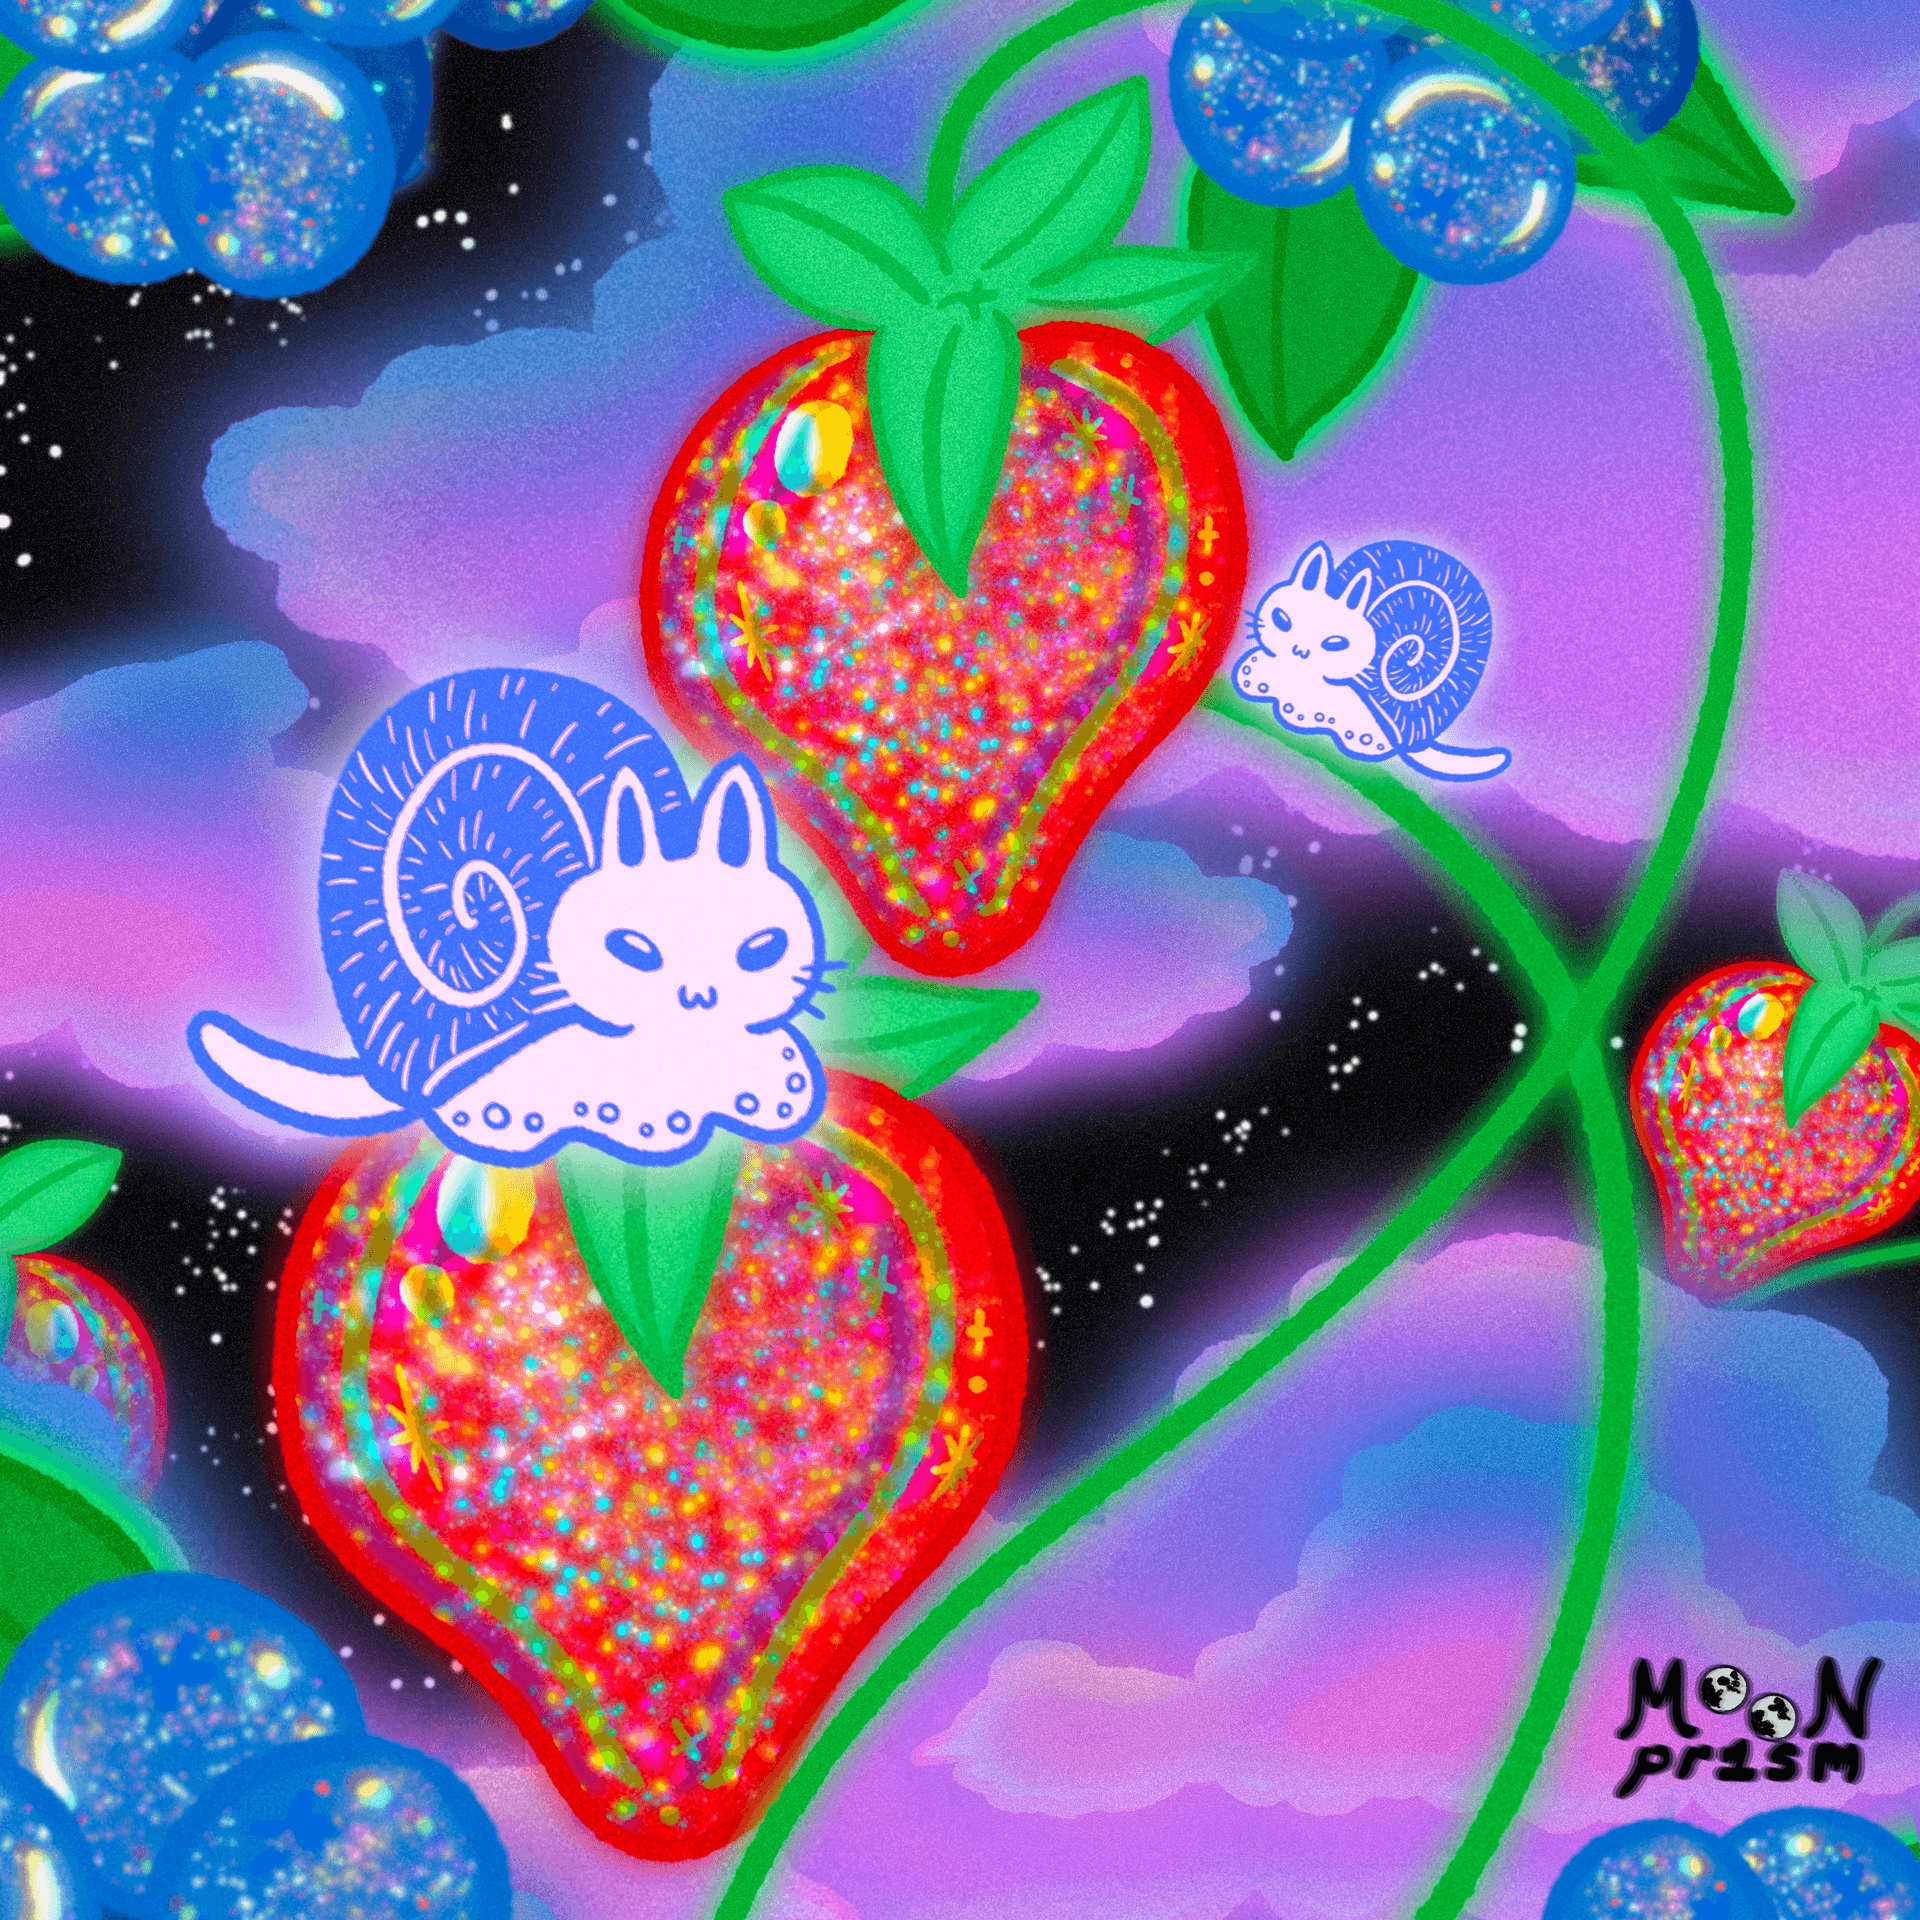 An illustration depicting two 'Snailish', snail-cat hybrid characters, on glittering and glass-like strawberry and blueberry plants. The night sky is full of stars and dreamy purple and blue clouds.